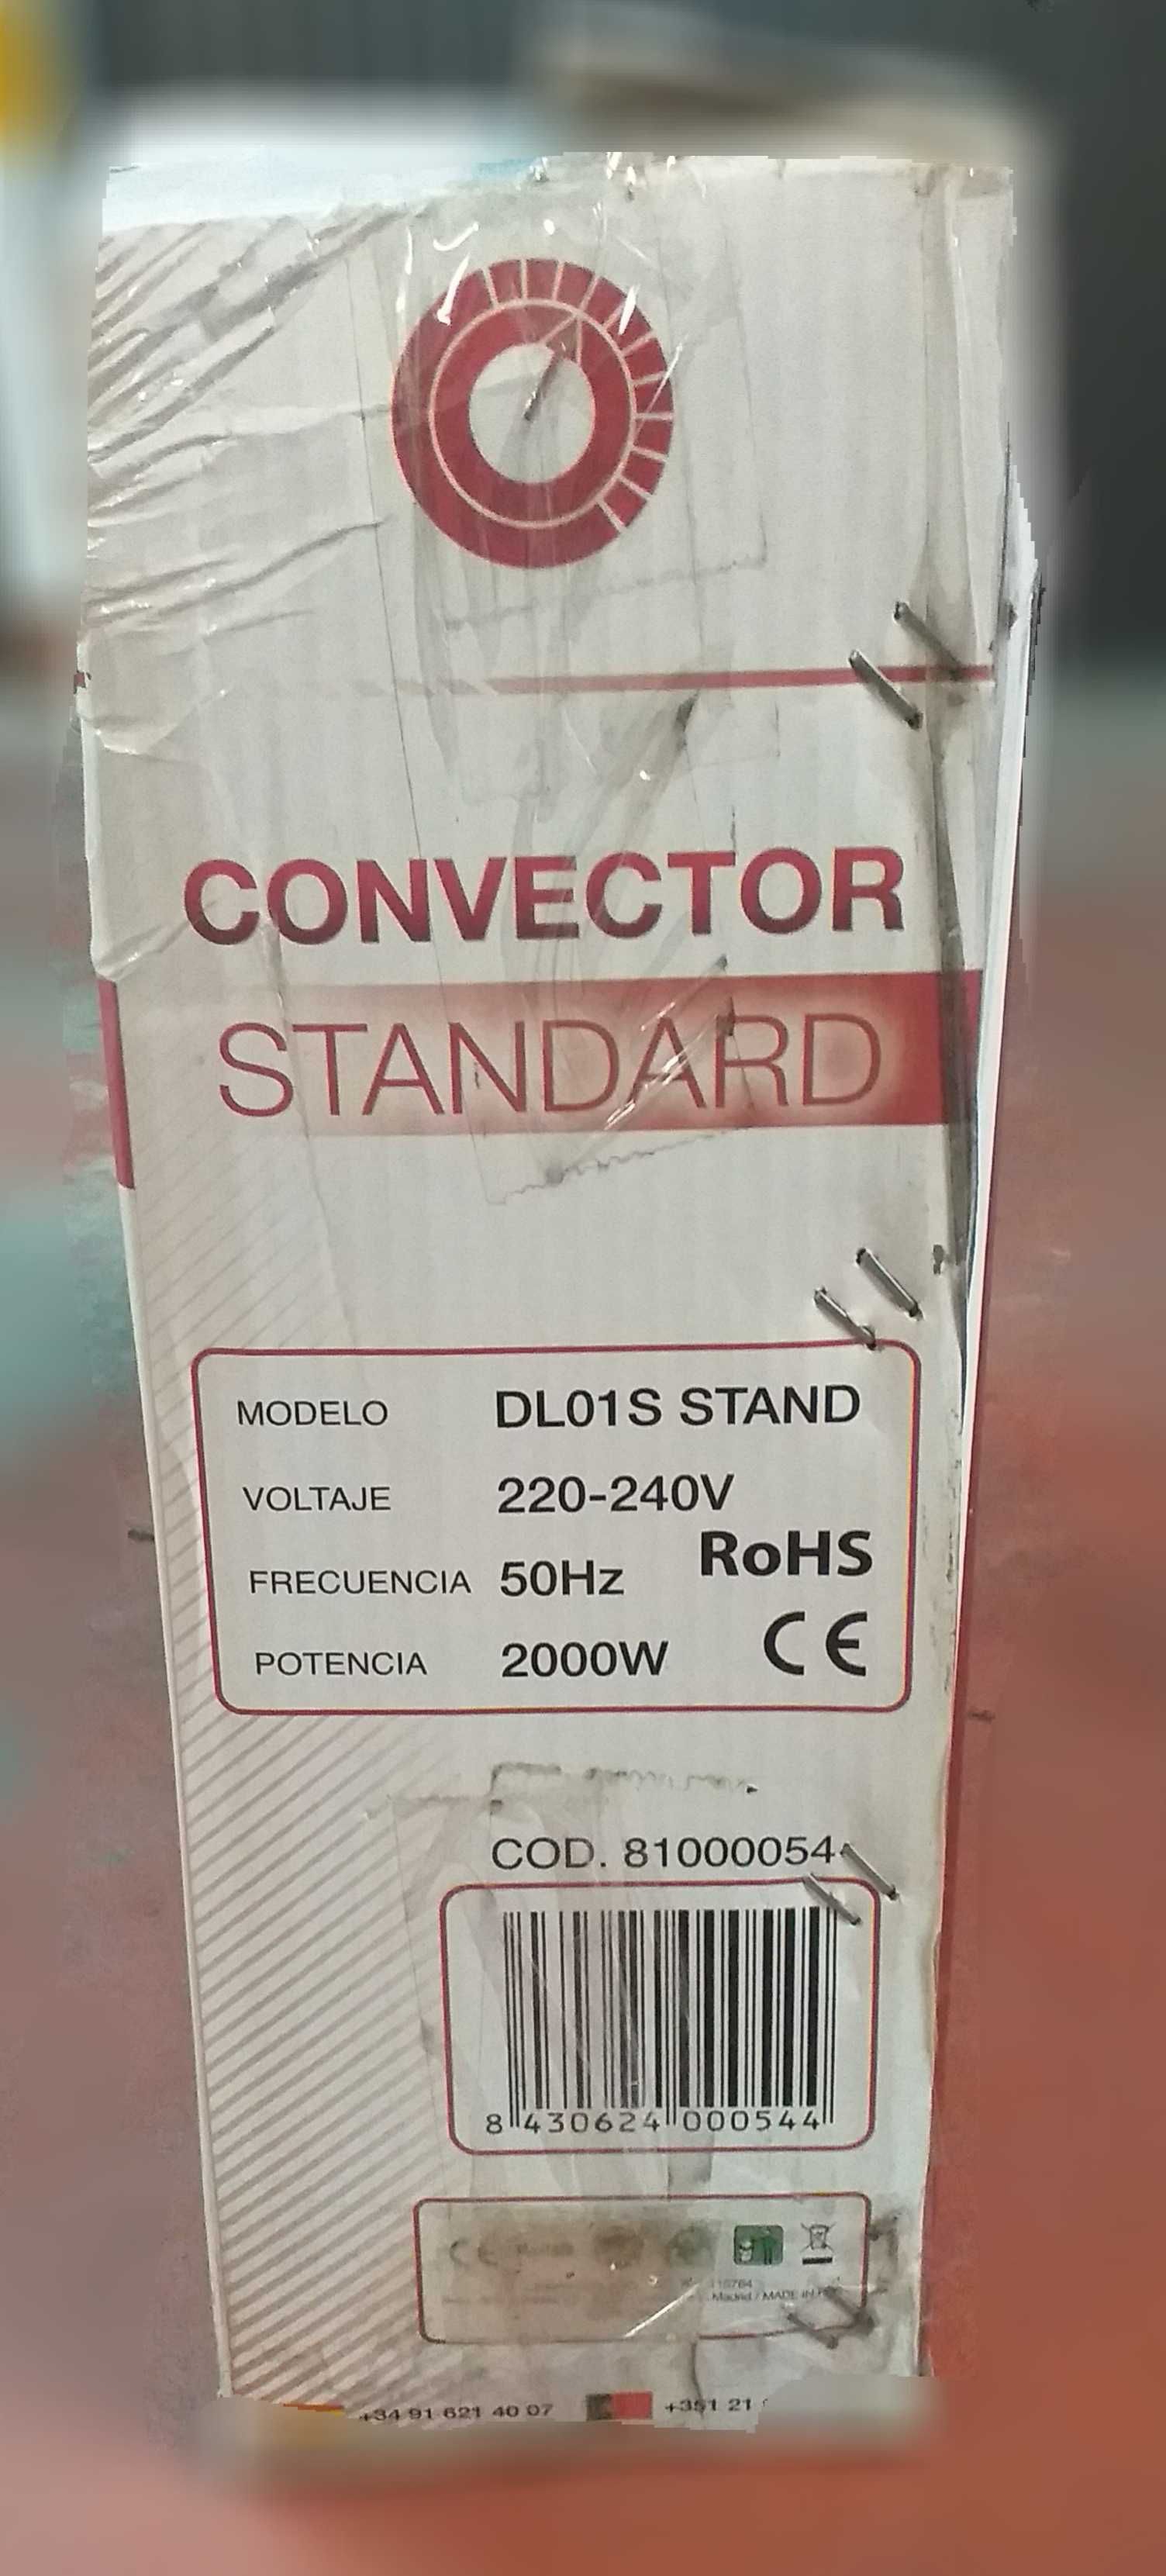 Convector DLO 1 S stand